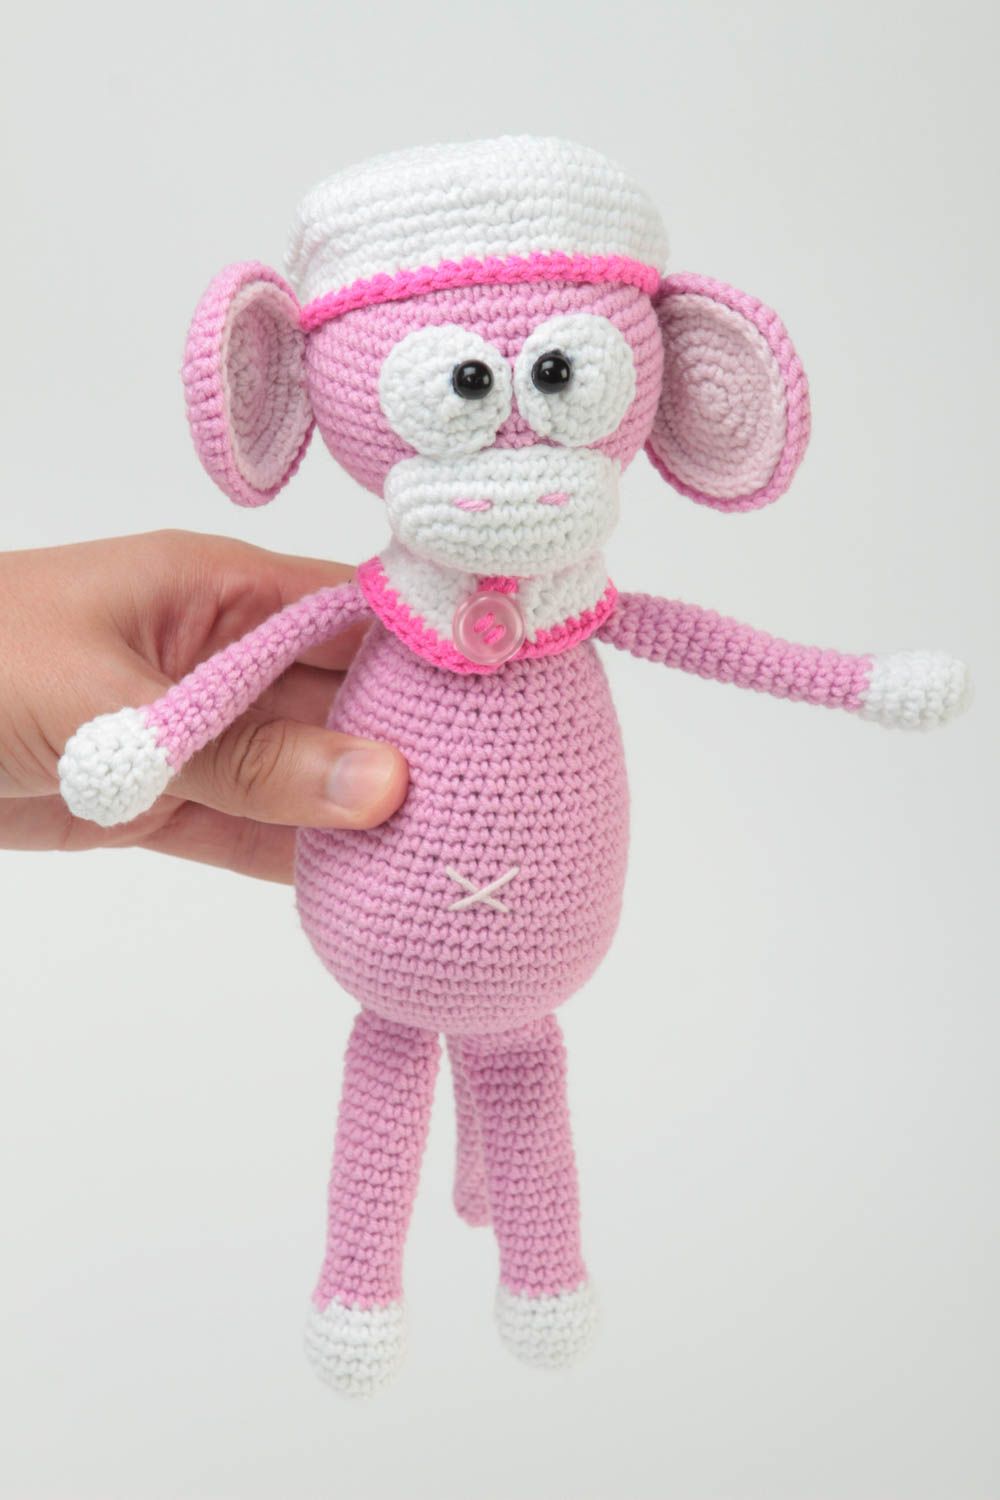 Cute handmade childrens toys crochet toy soft toy for kids birthday gift ideas photo 5